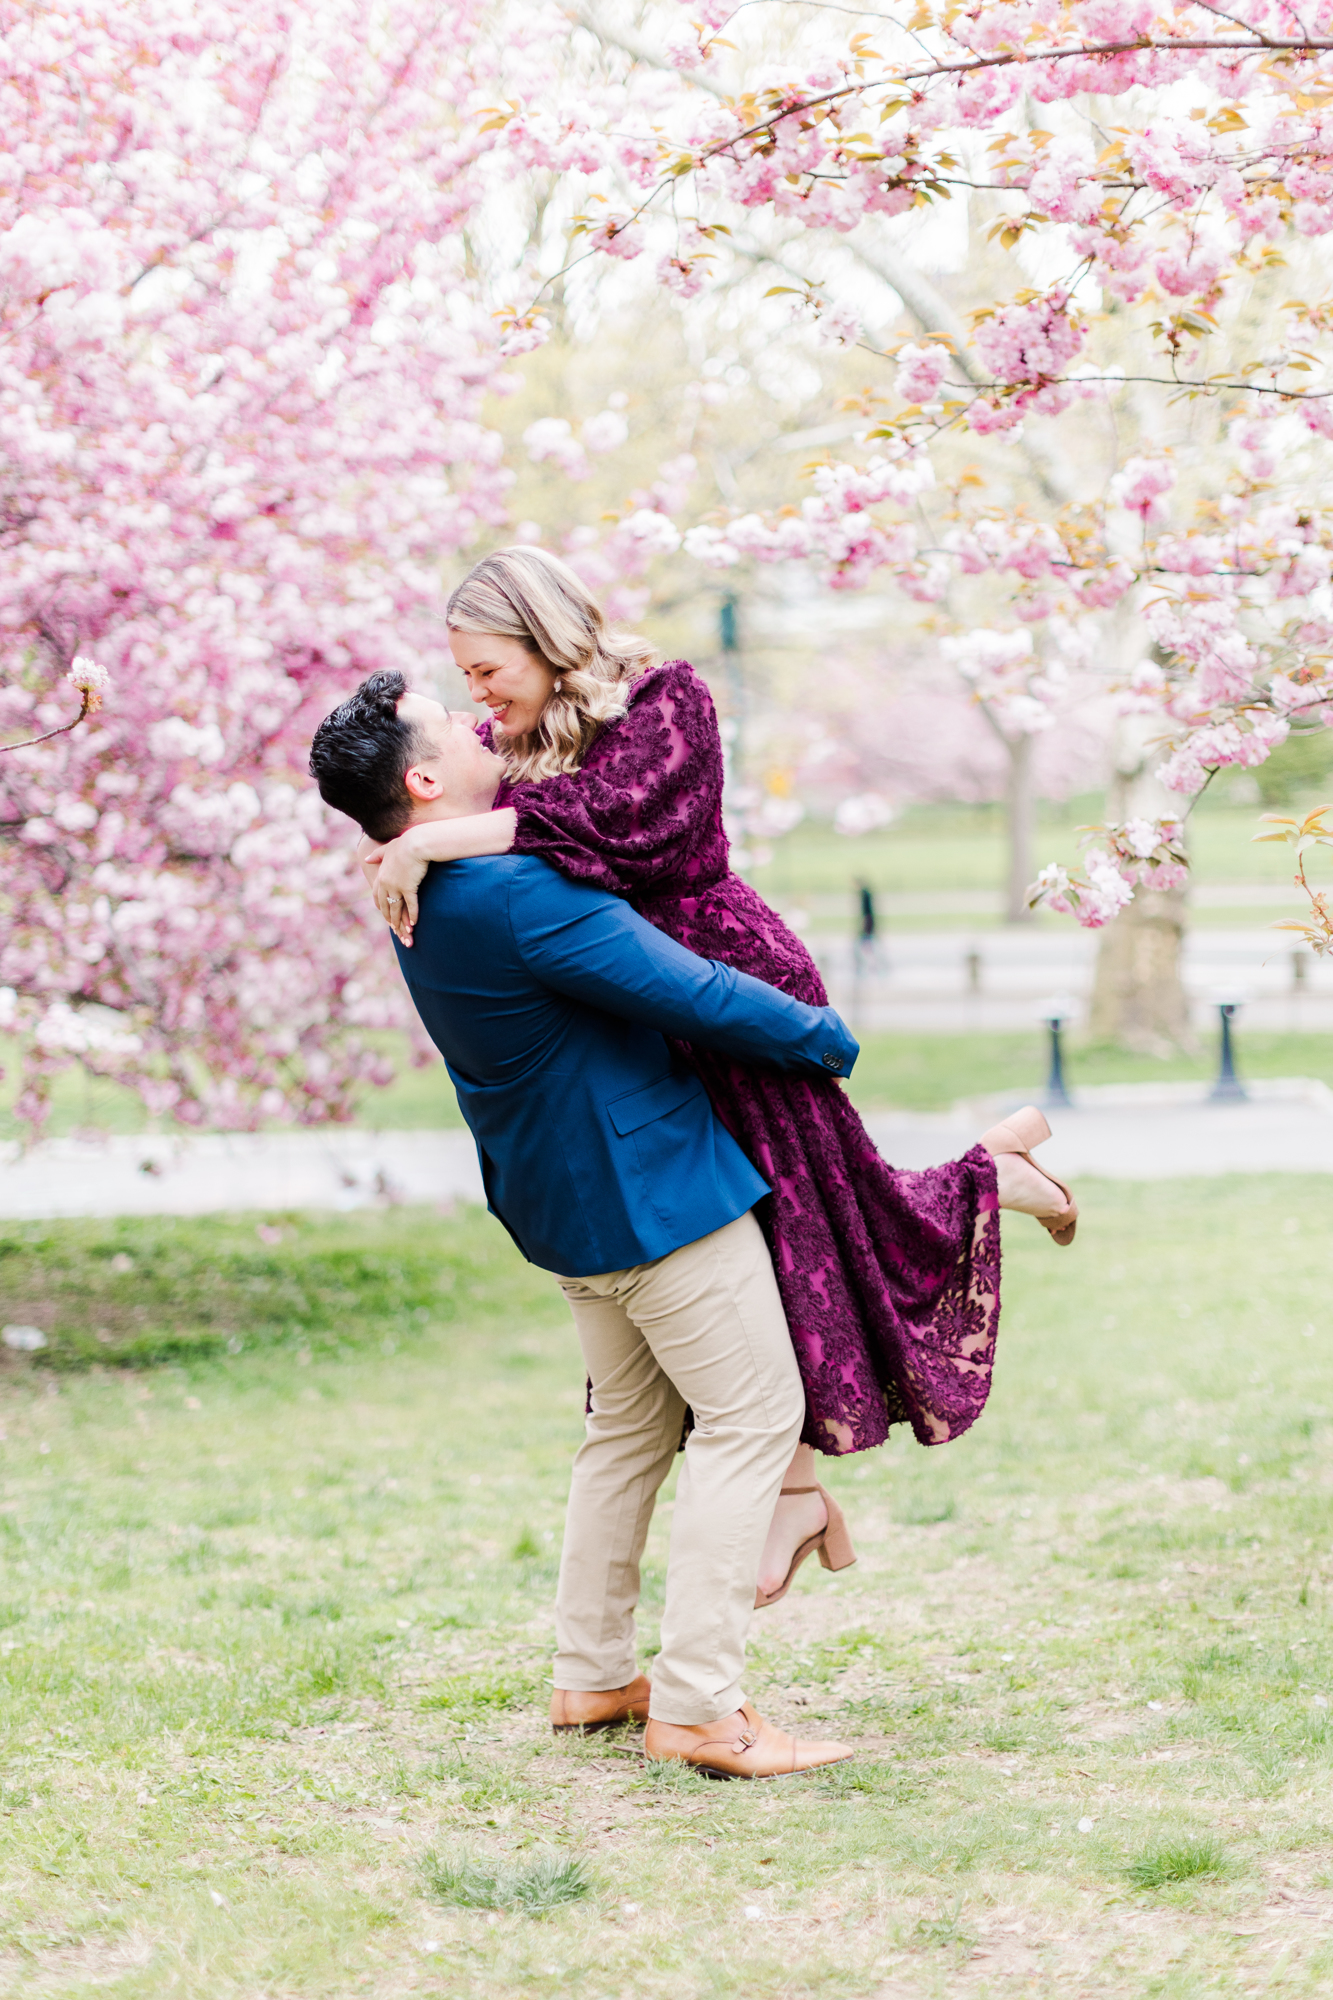 Beautiful Engagement Pictures in Central Park